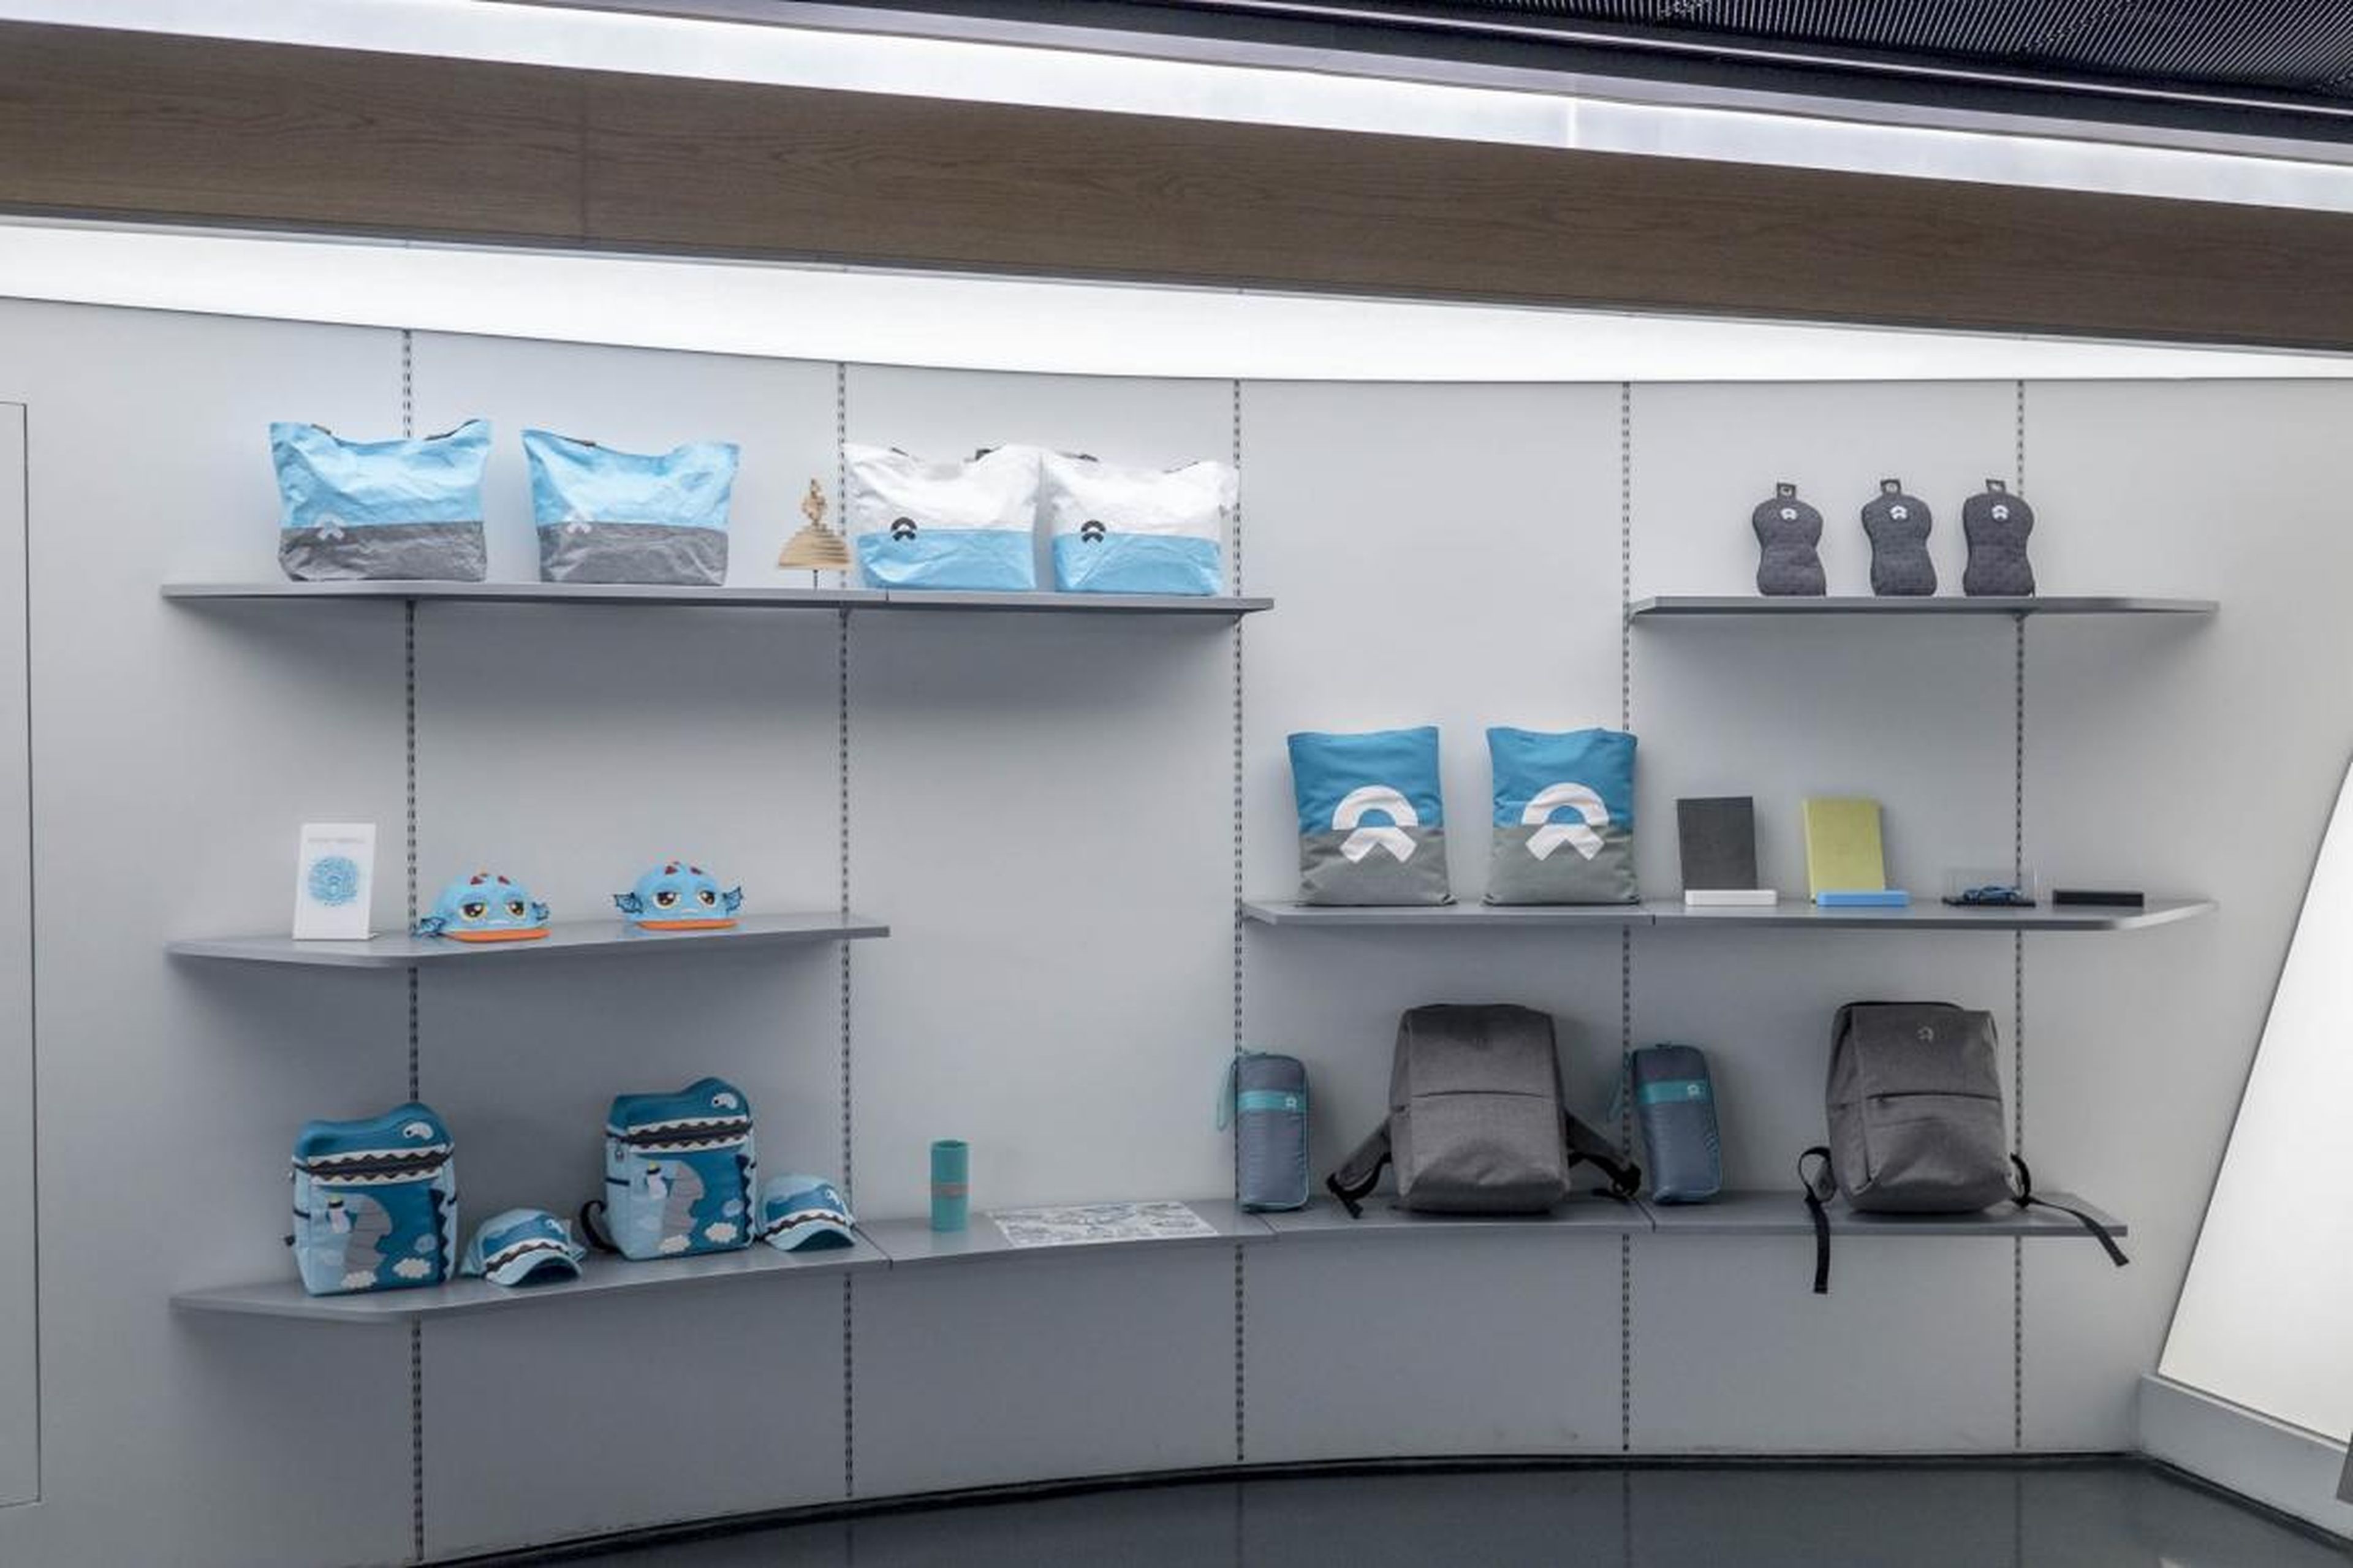 To that end, there's a ton of Nio merchandise available to purchase in the Nio House.